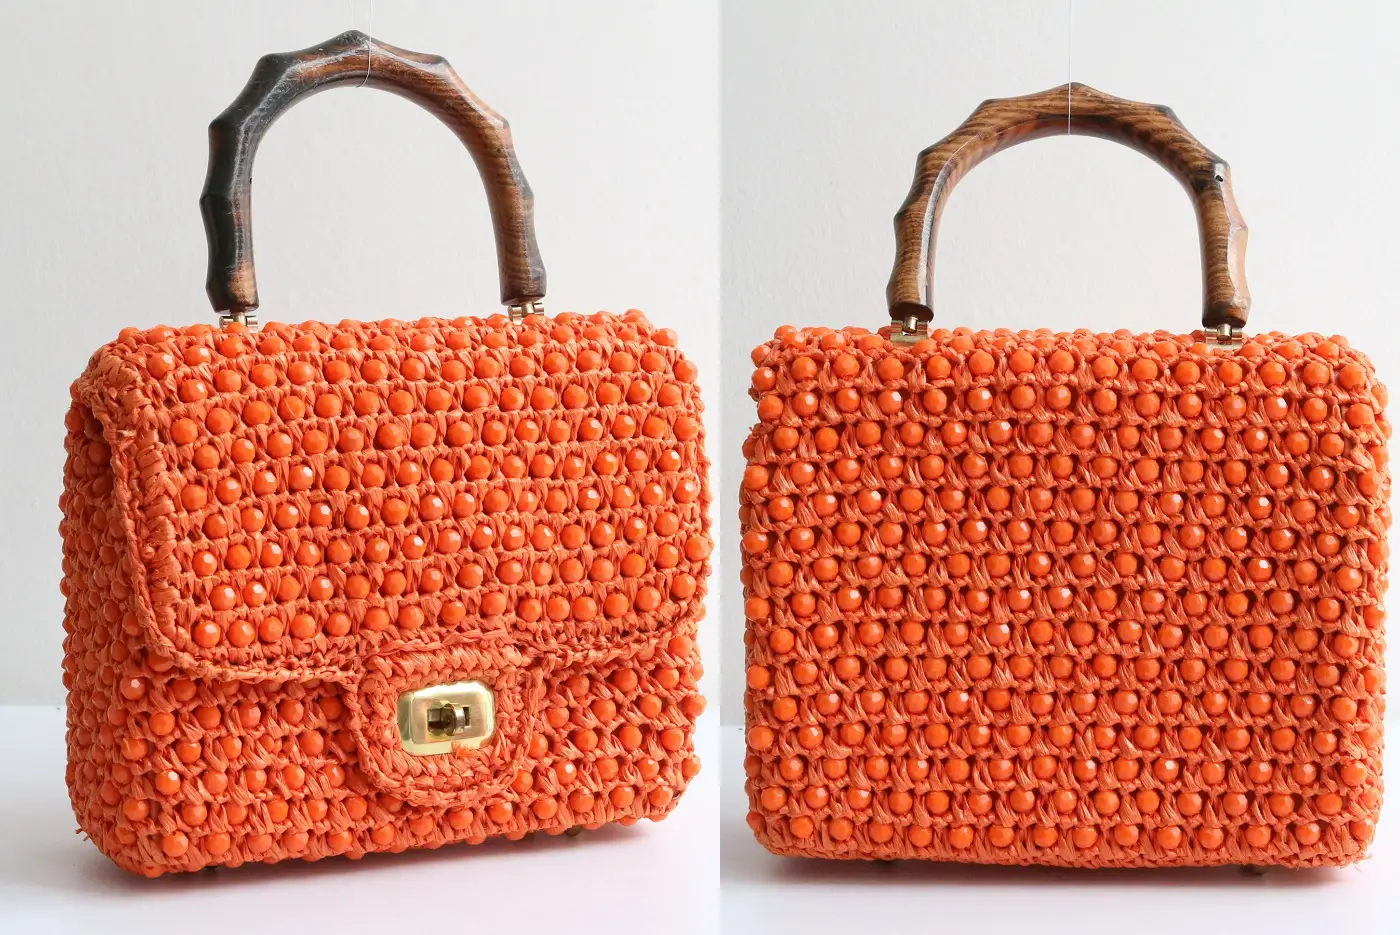 The Duchess of Cambridge carried Willow Hilson Raffia & Beads Vintage Bag